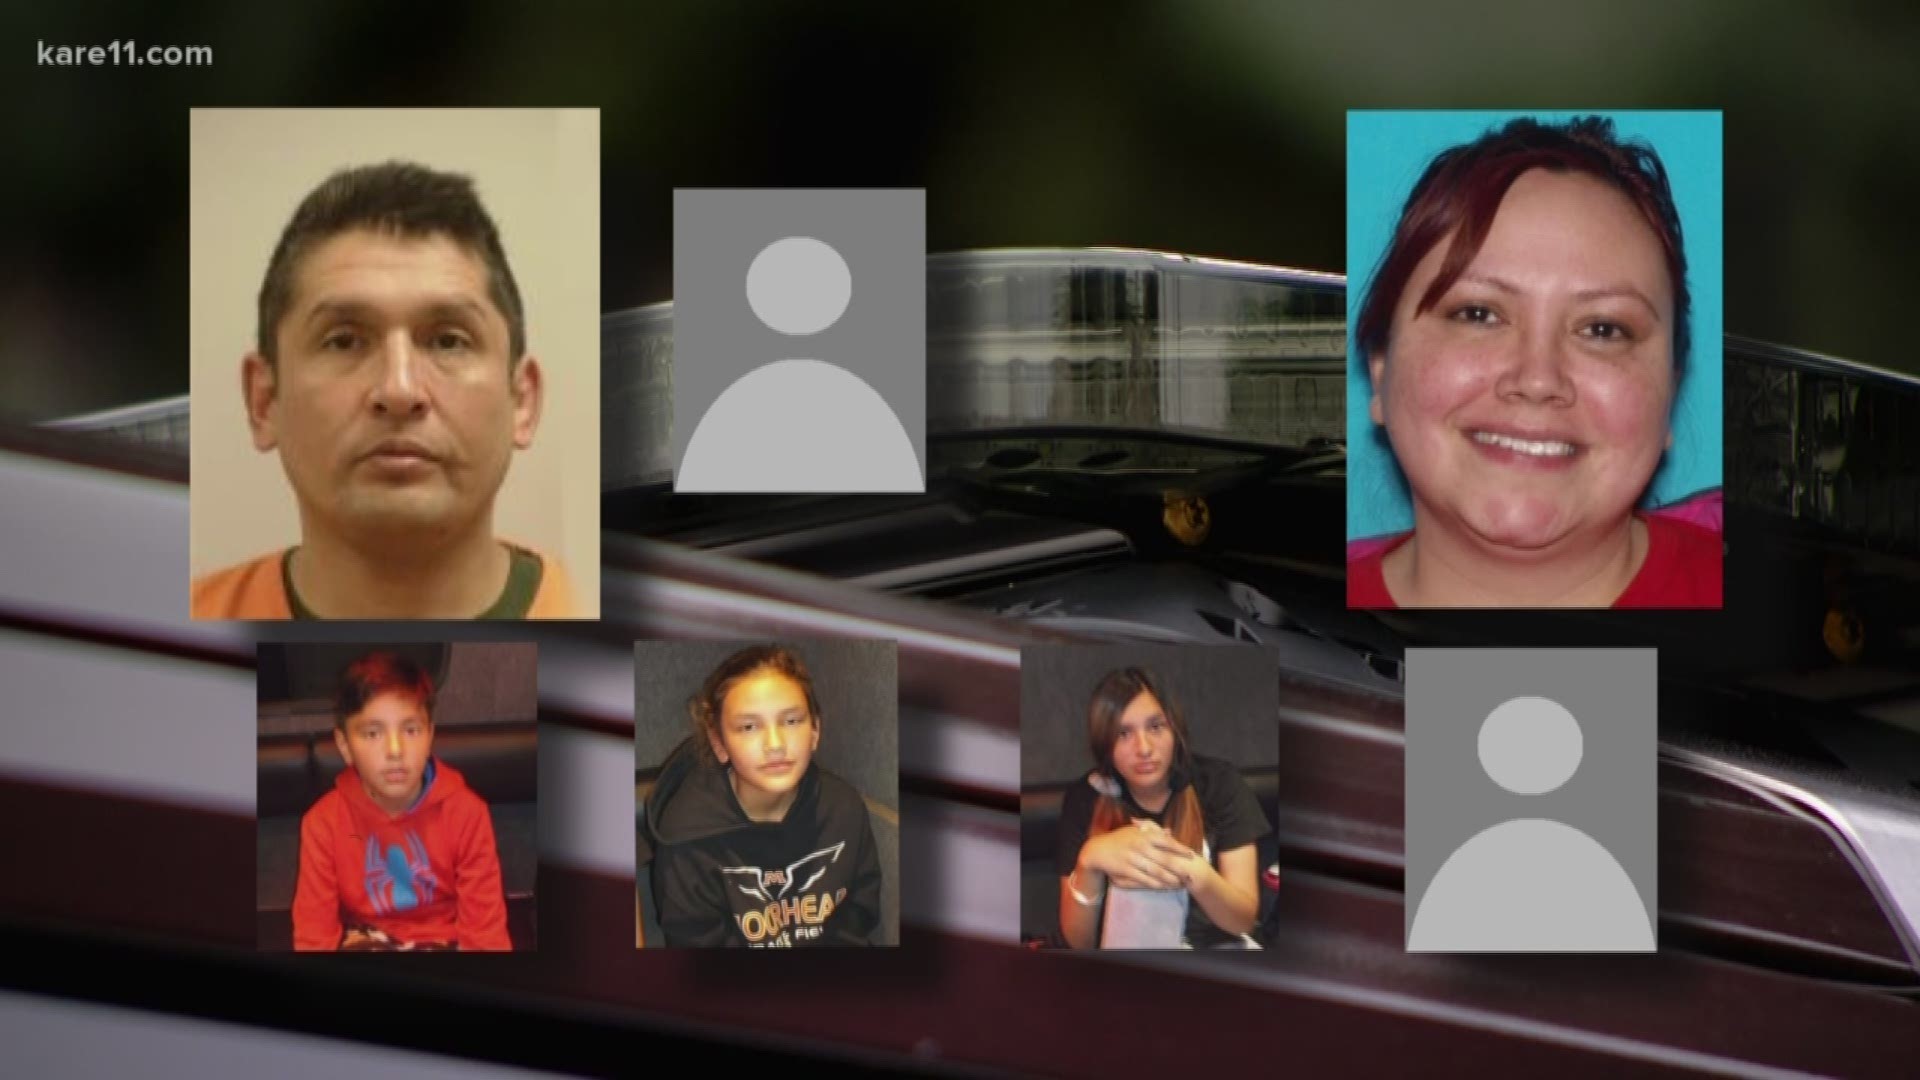 The Minnesota BCA has put out an alert about five missing children in Mower County. They believe the mother may be traveling with the children in defiance of a court order. https://kare11.tv/2QkGtsD